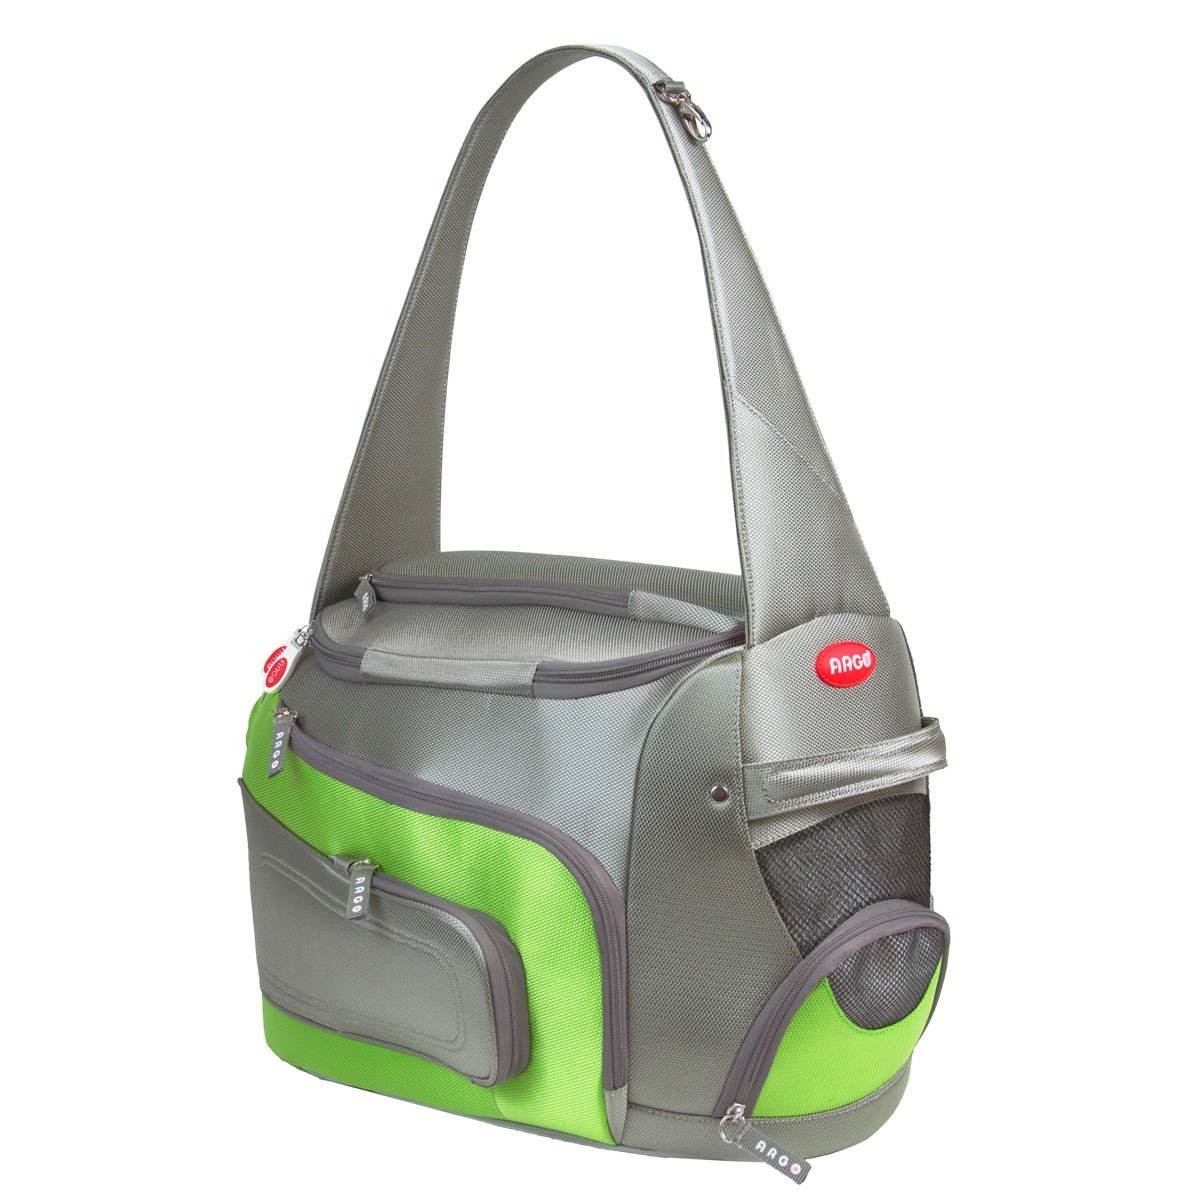 Duff-o Airline Approved Pet Carrier, Green - Large